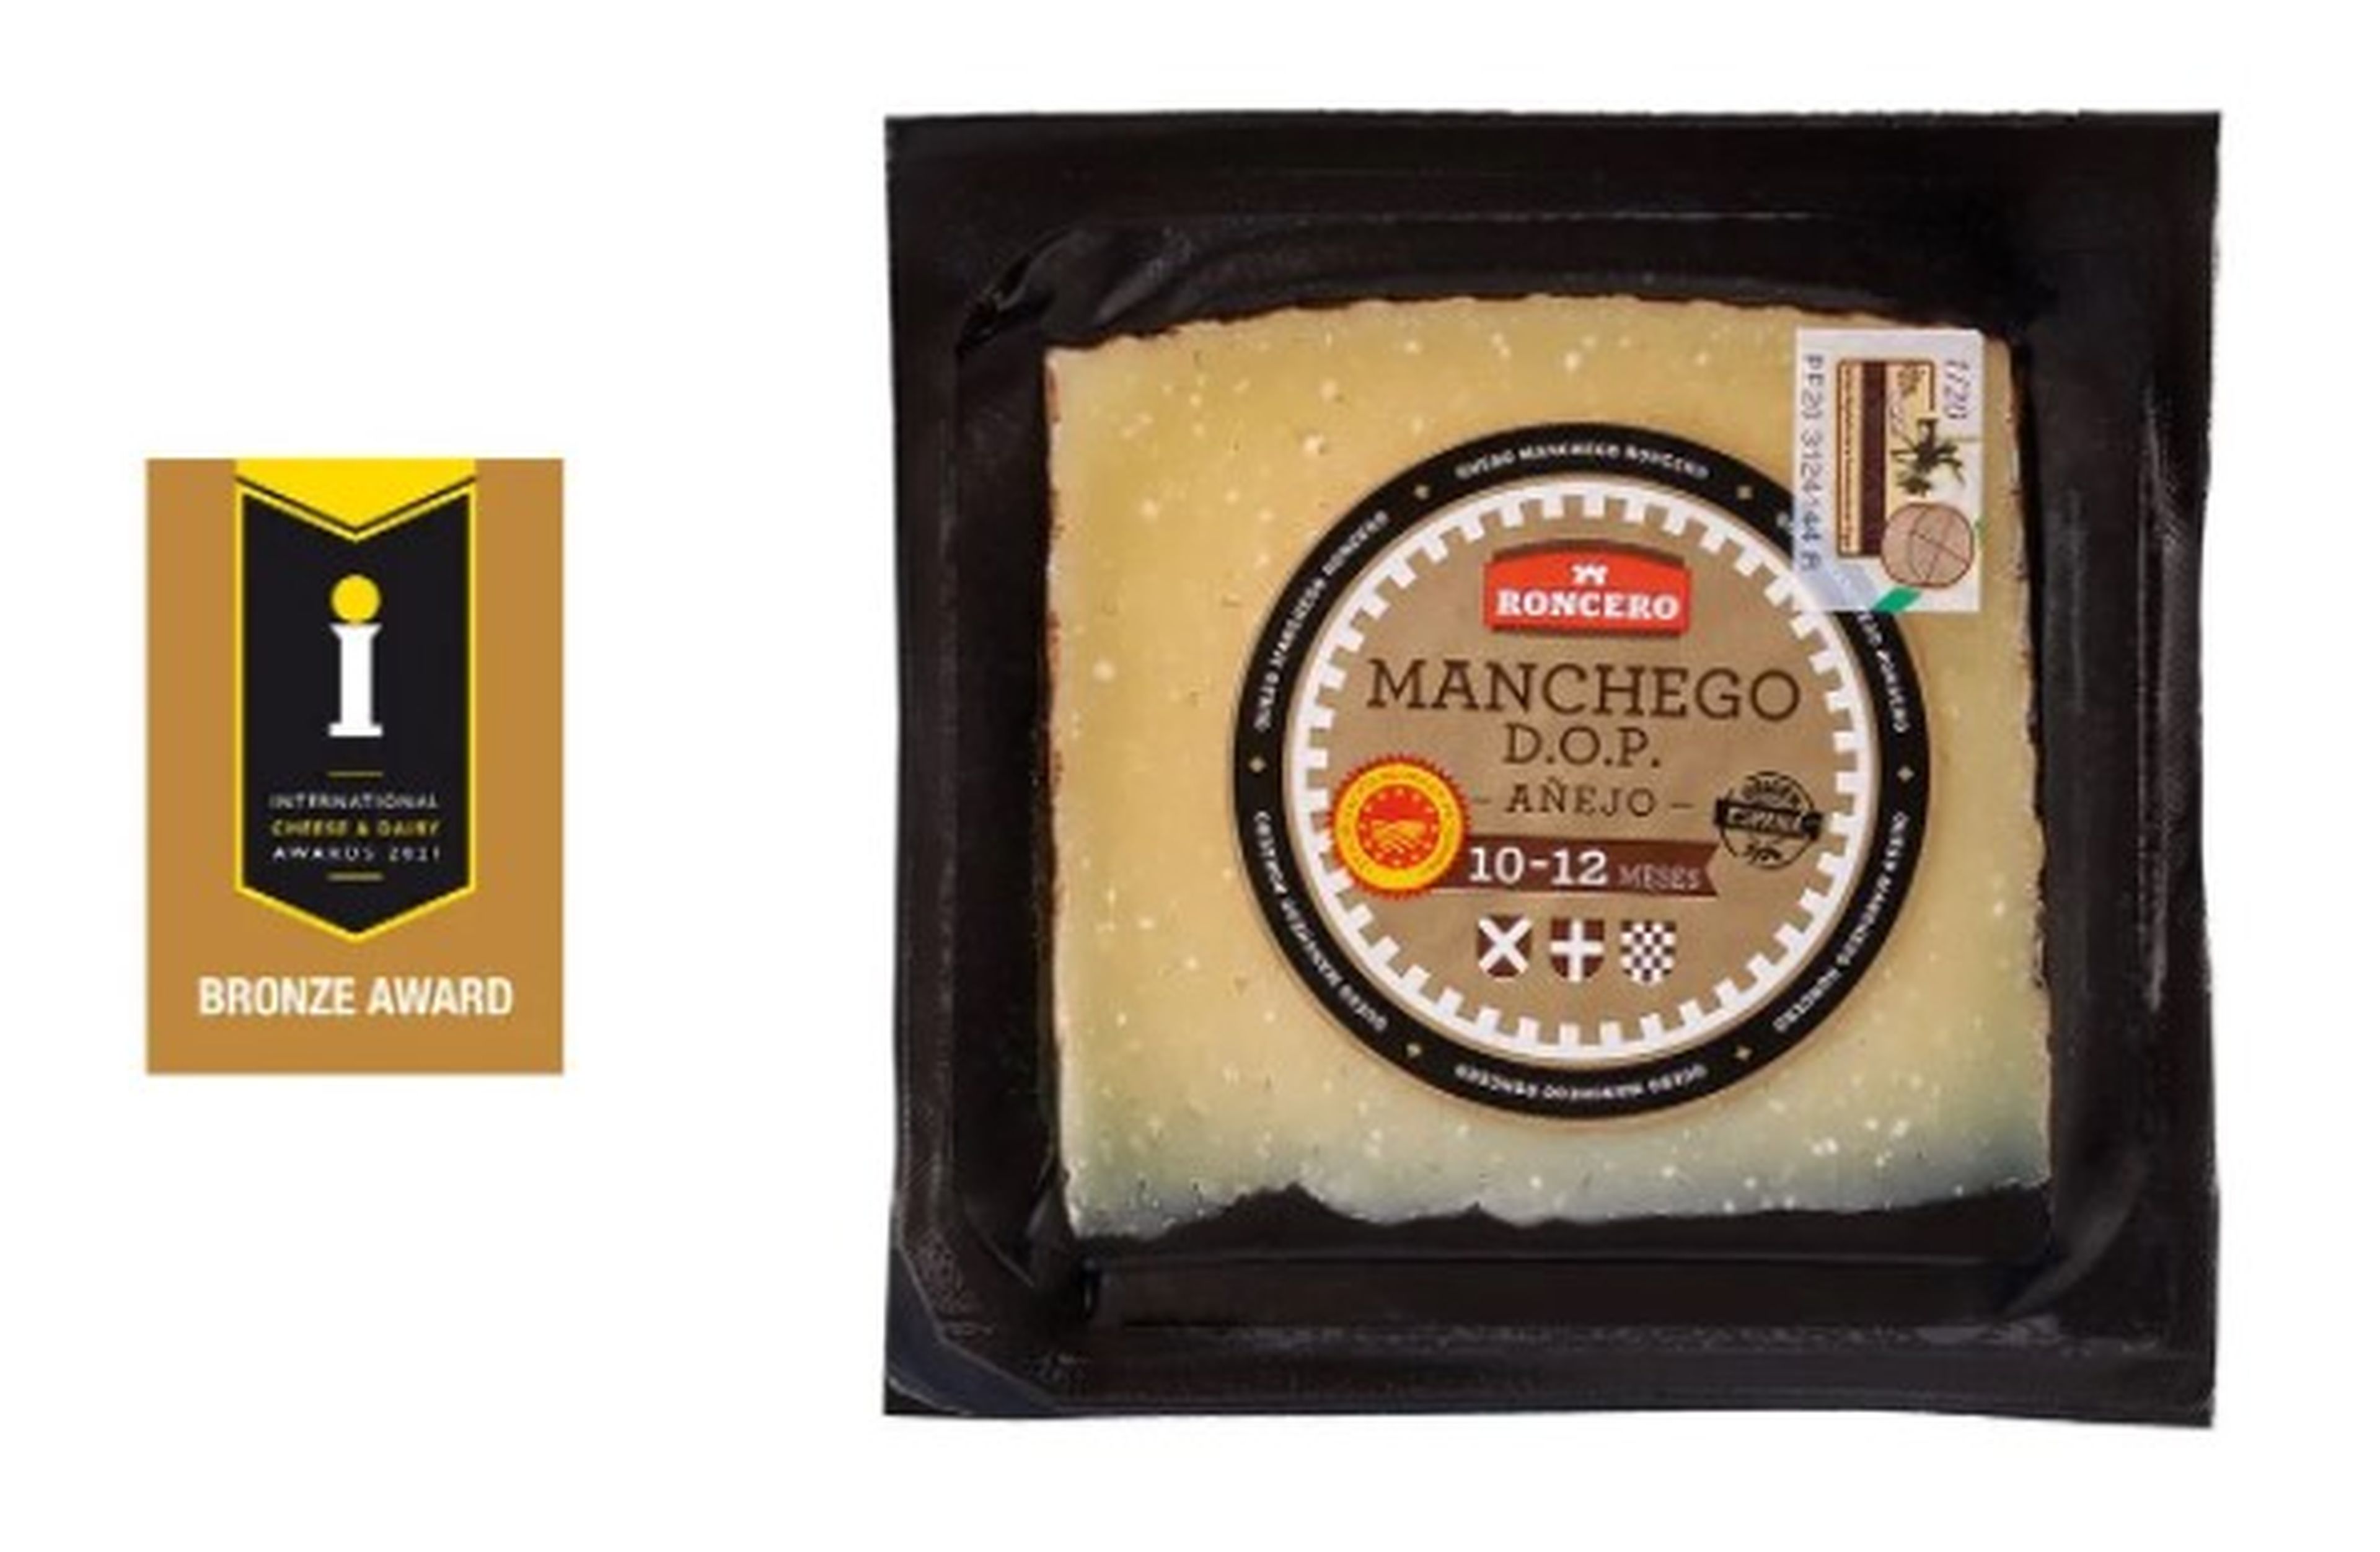 queso manchego añejo 9-12 meses, Lidl